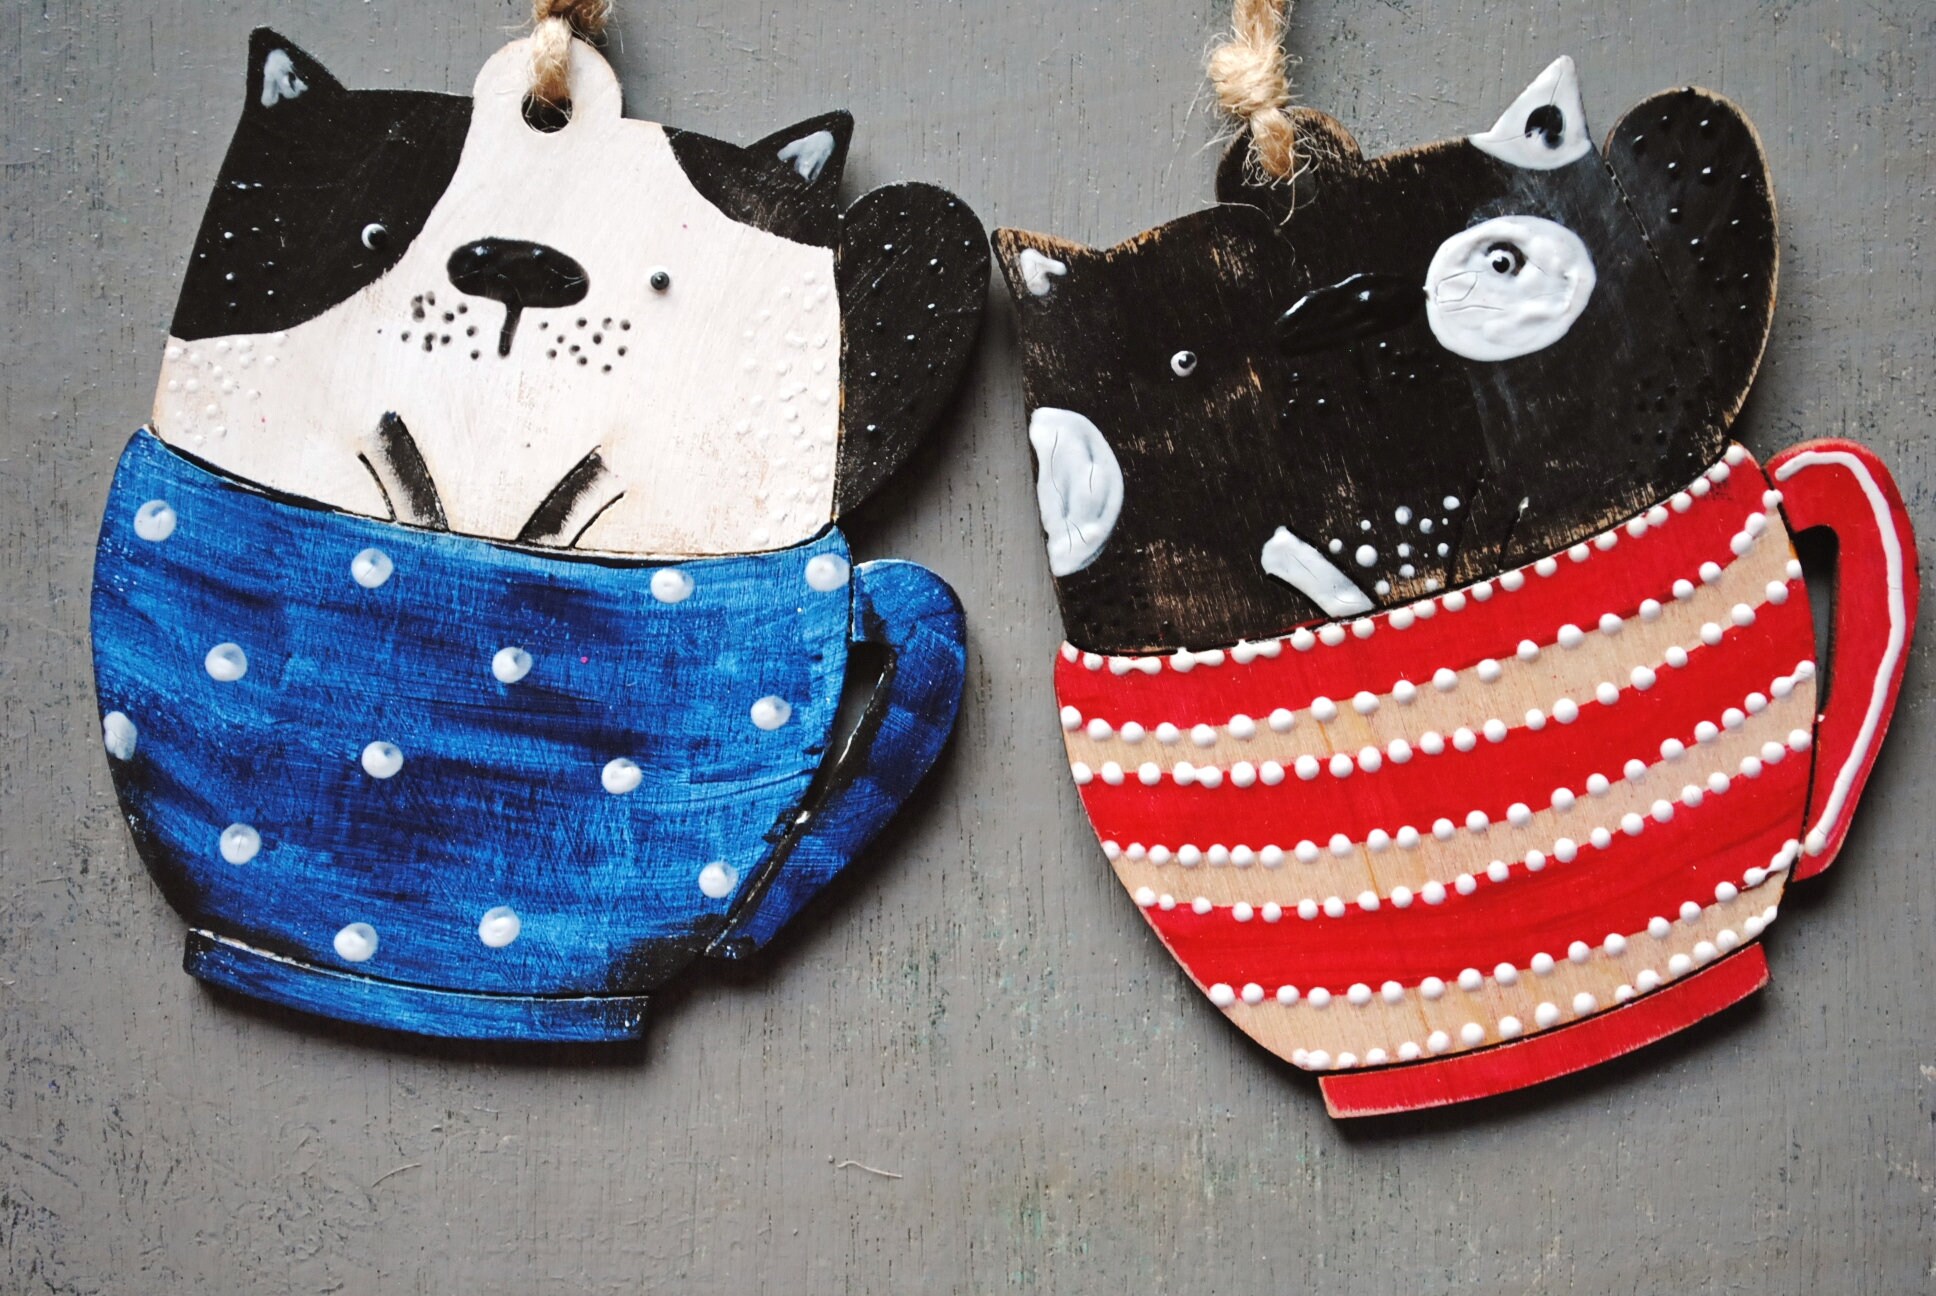 A pair of cat ornaments 4 baby shower gift Christmas decoration nursery decor birthday present